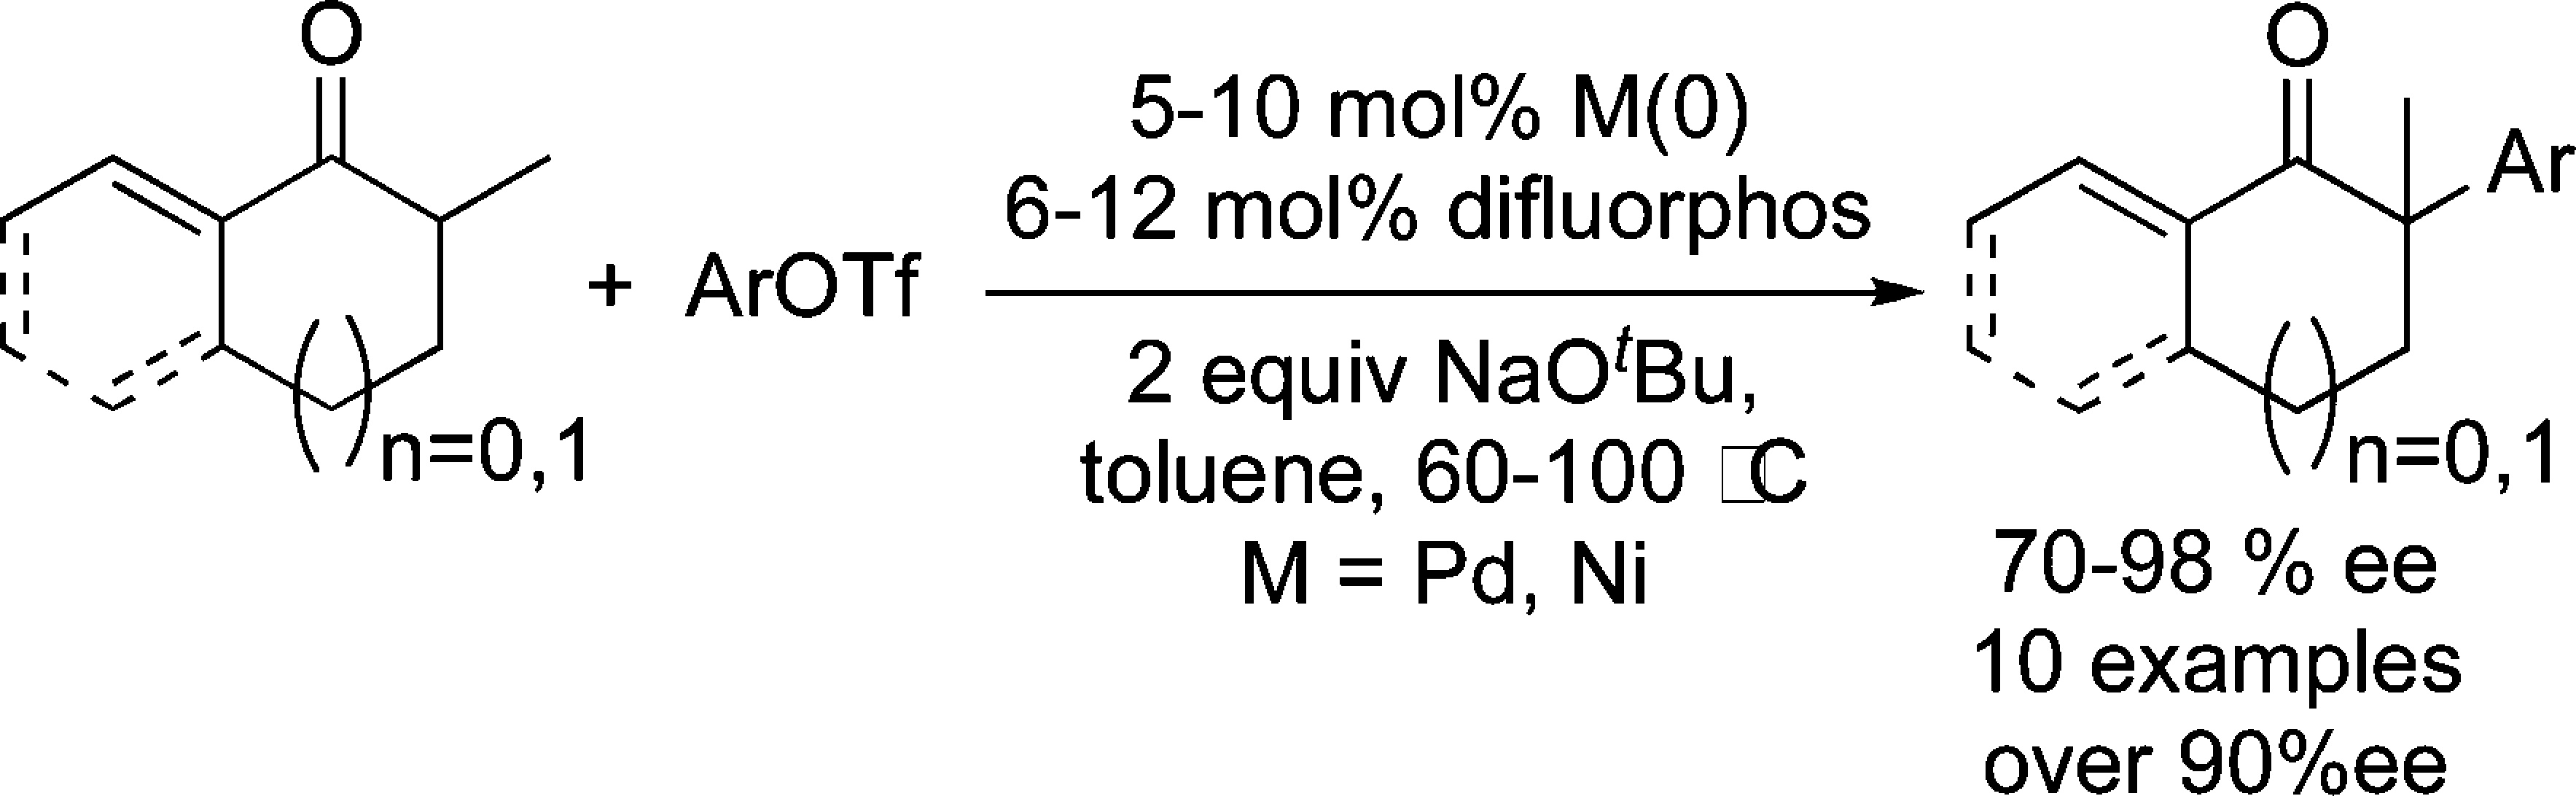 Enantioselective-Arylation of Ketones with Aryl Triflates Catalyzed by Difluorphos Complexes of Palladium and Nickel